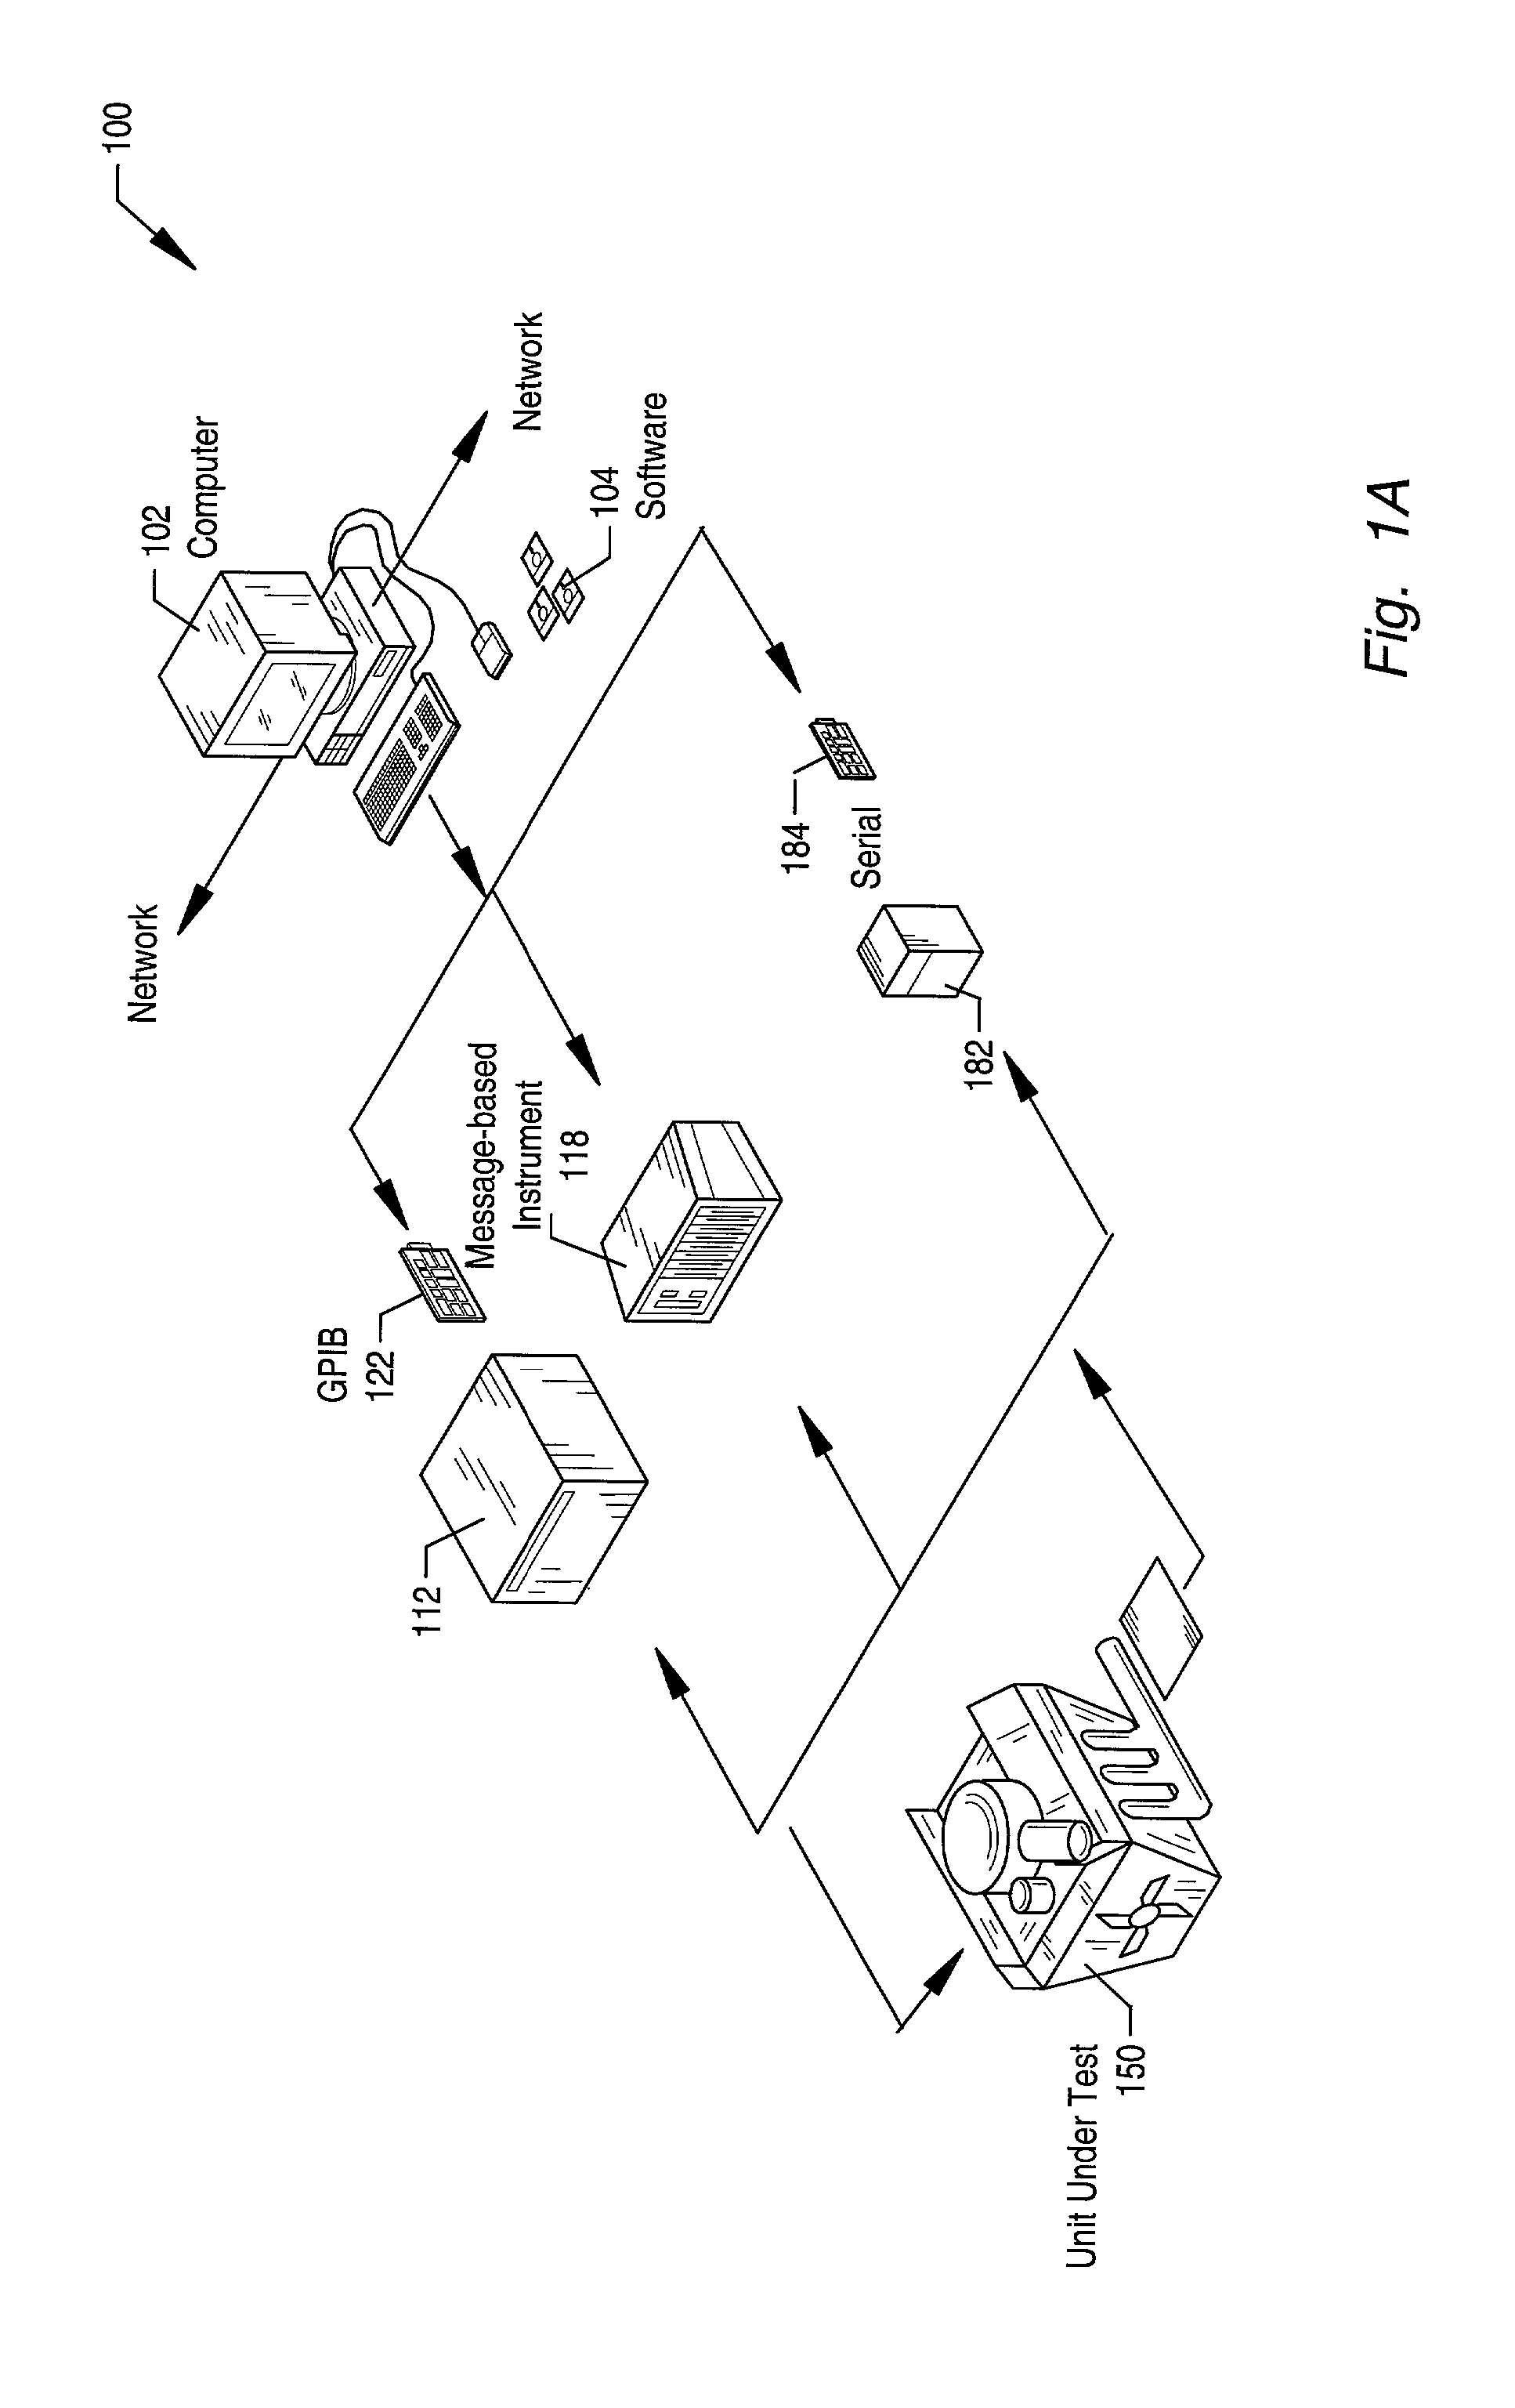 Method and apparatus for controlling an instrumentation system